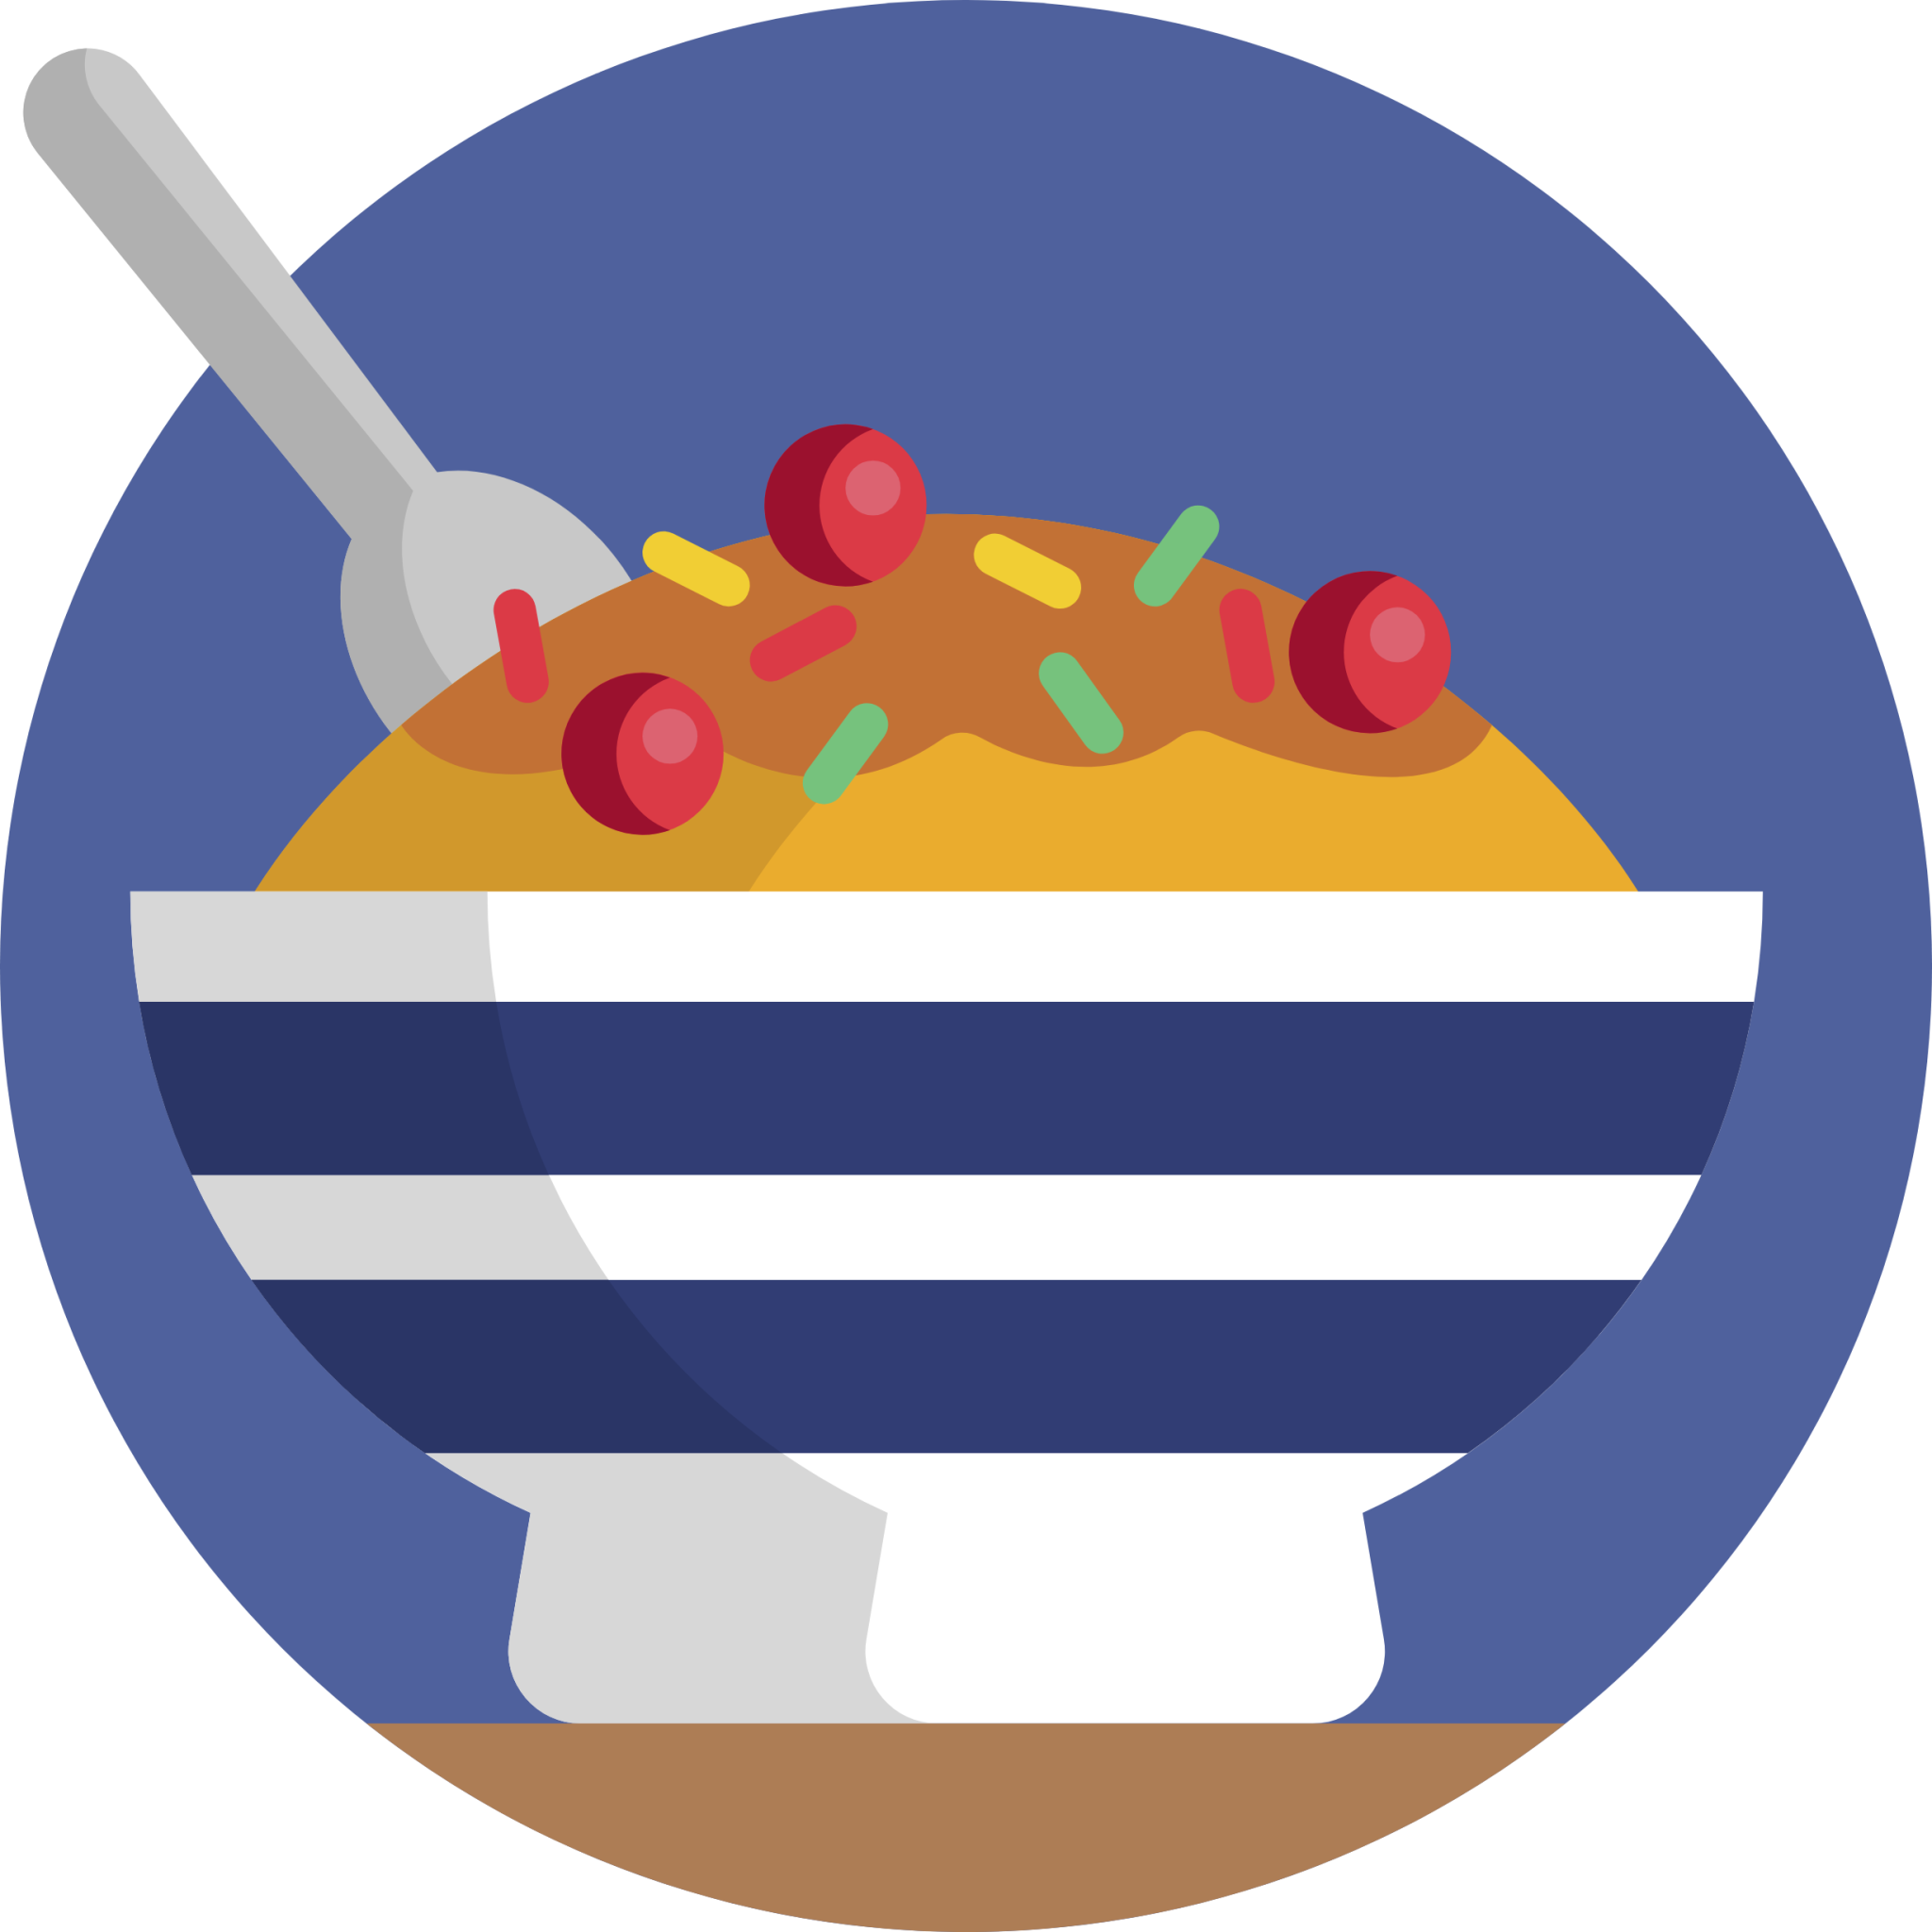 breakfast icon png